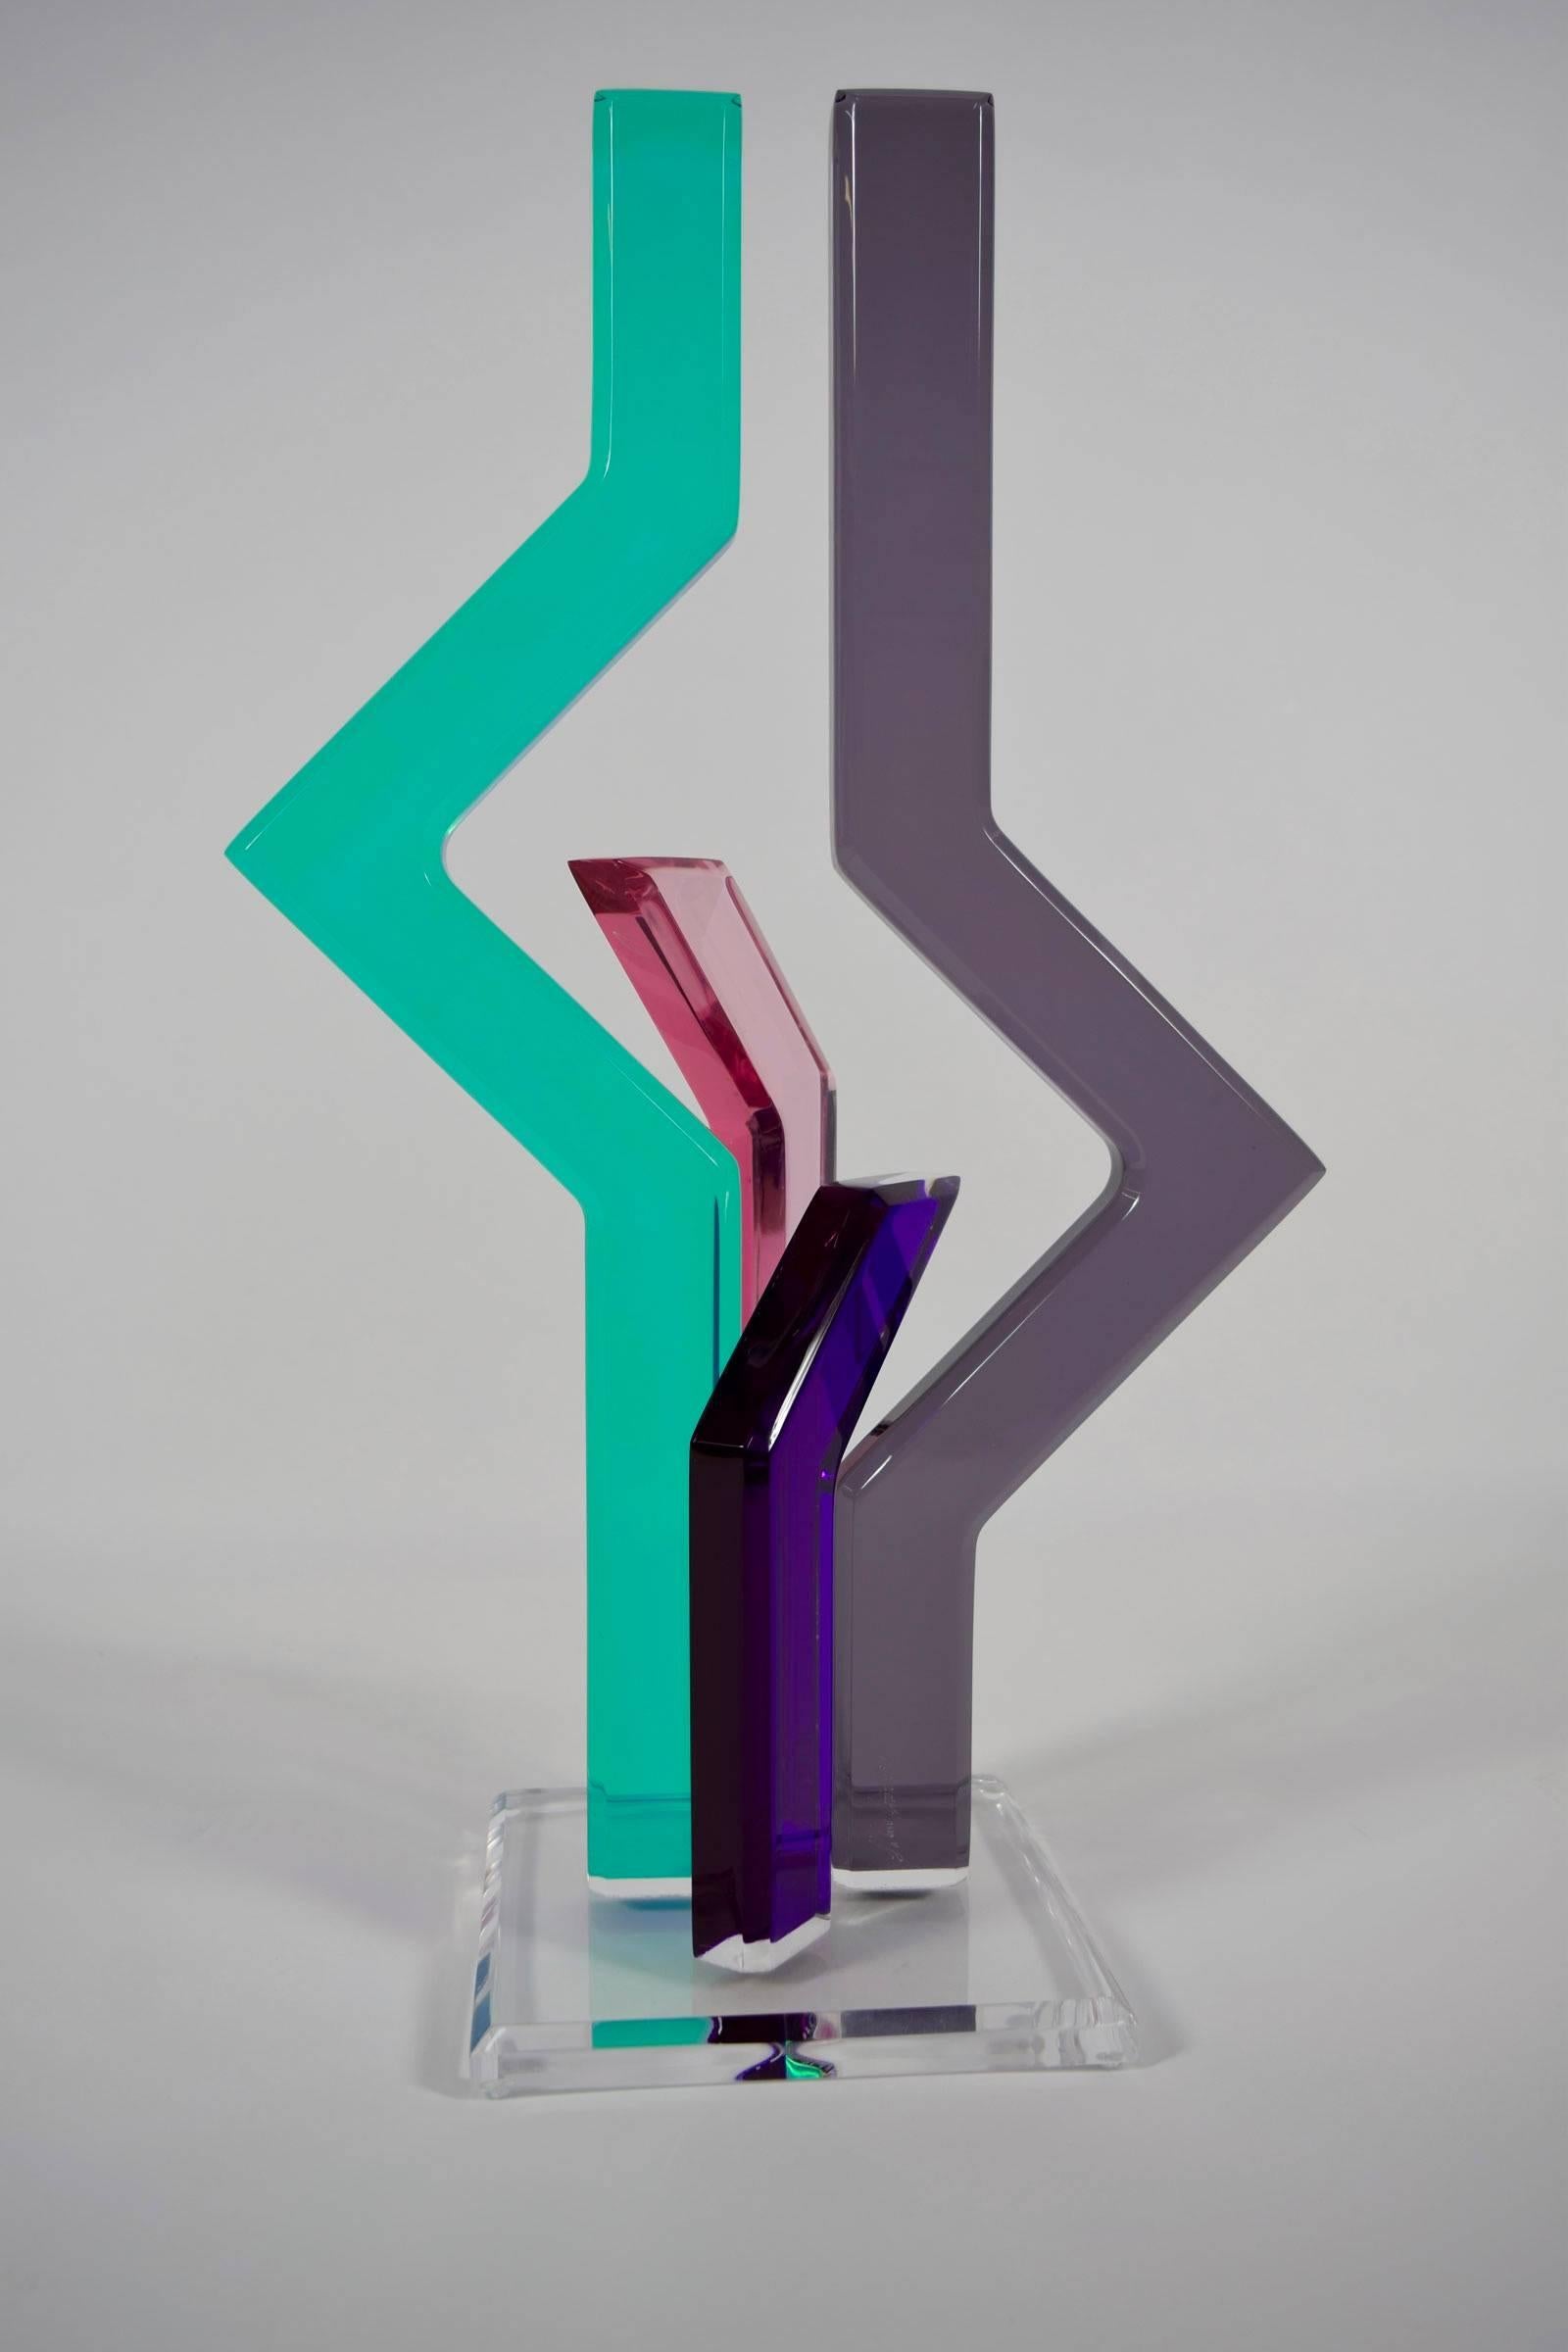 A beautiful colored Lucite sculpture piece by Shlomi Haziza. The piece is signed.